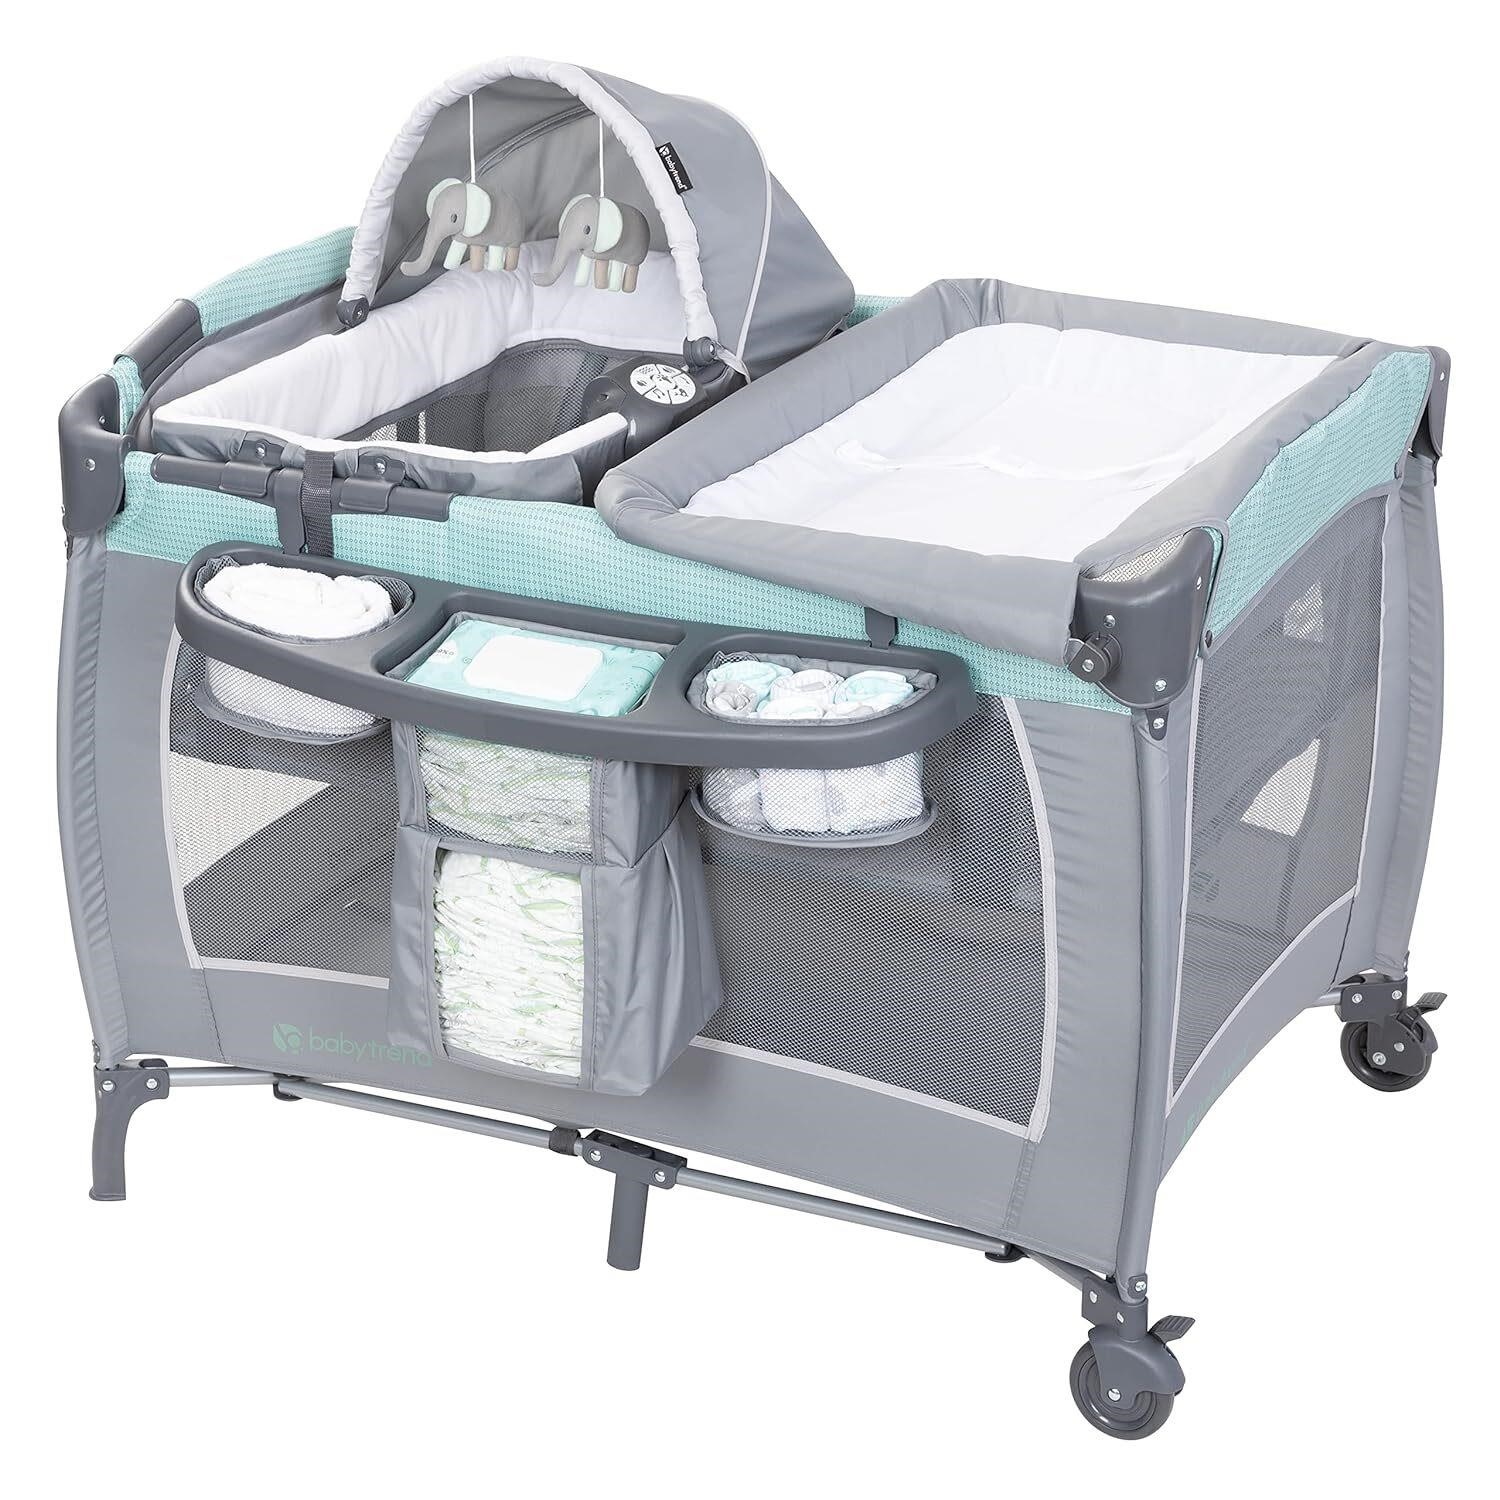 $147  Baby Trend Lil' Snooze Deluxe Playard  Mint